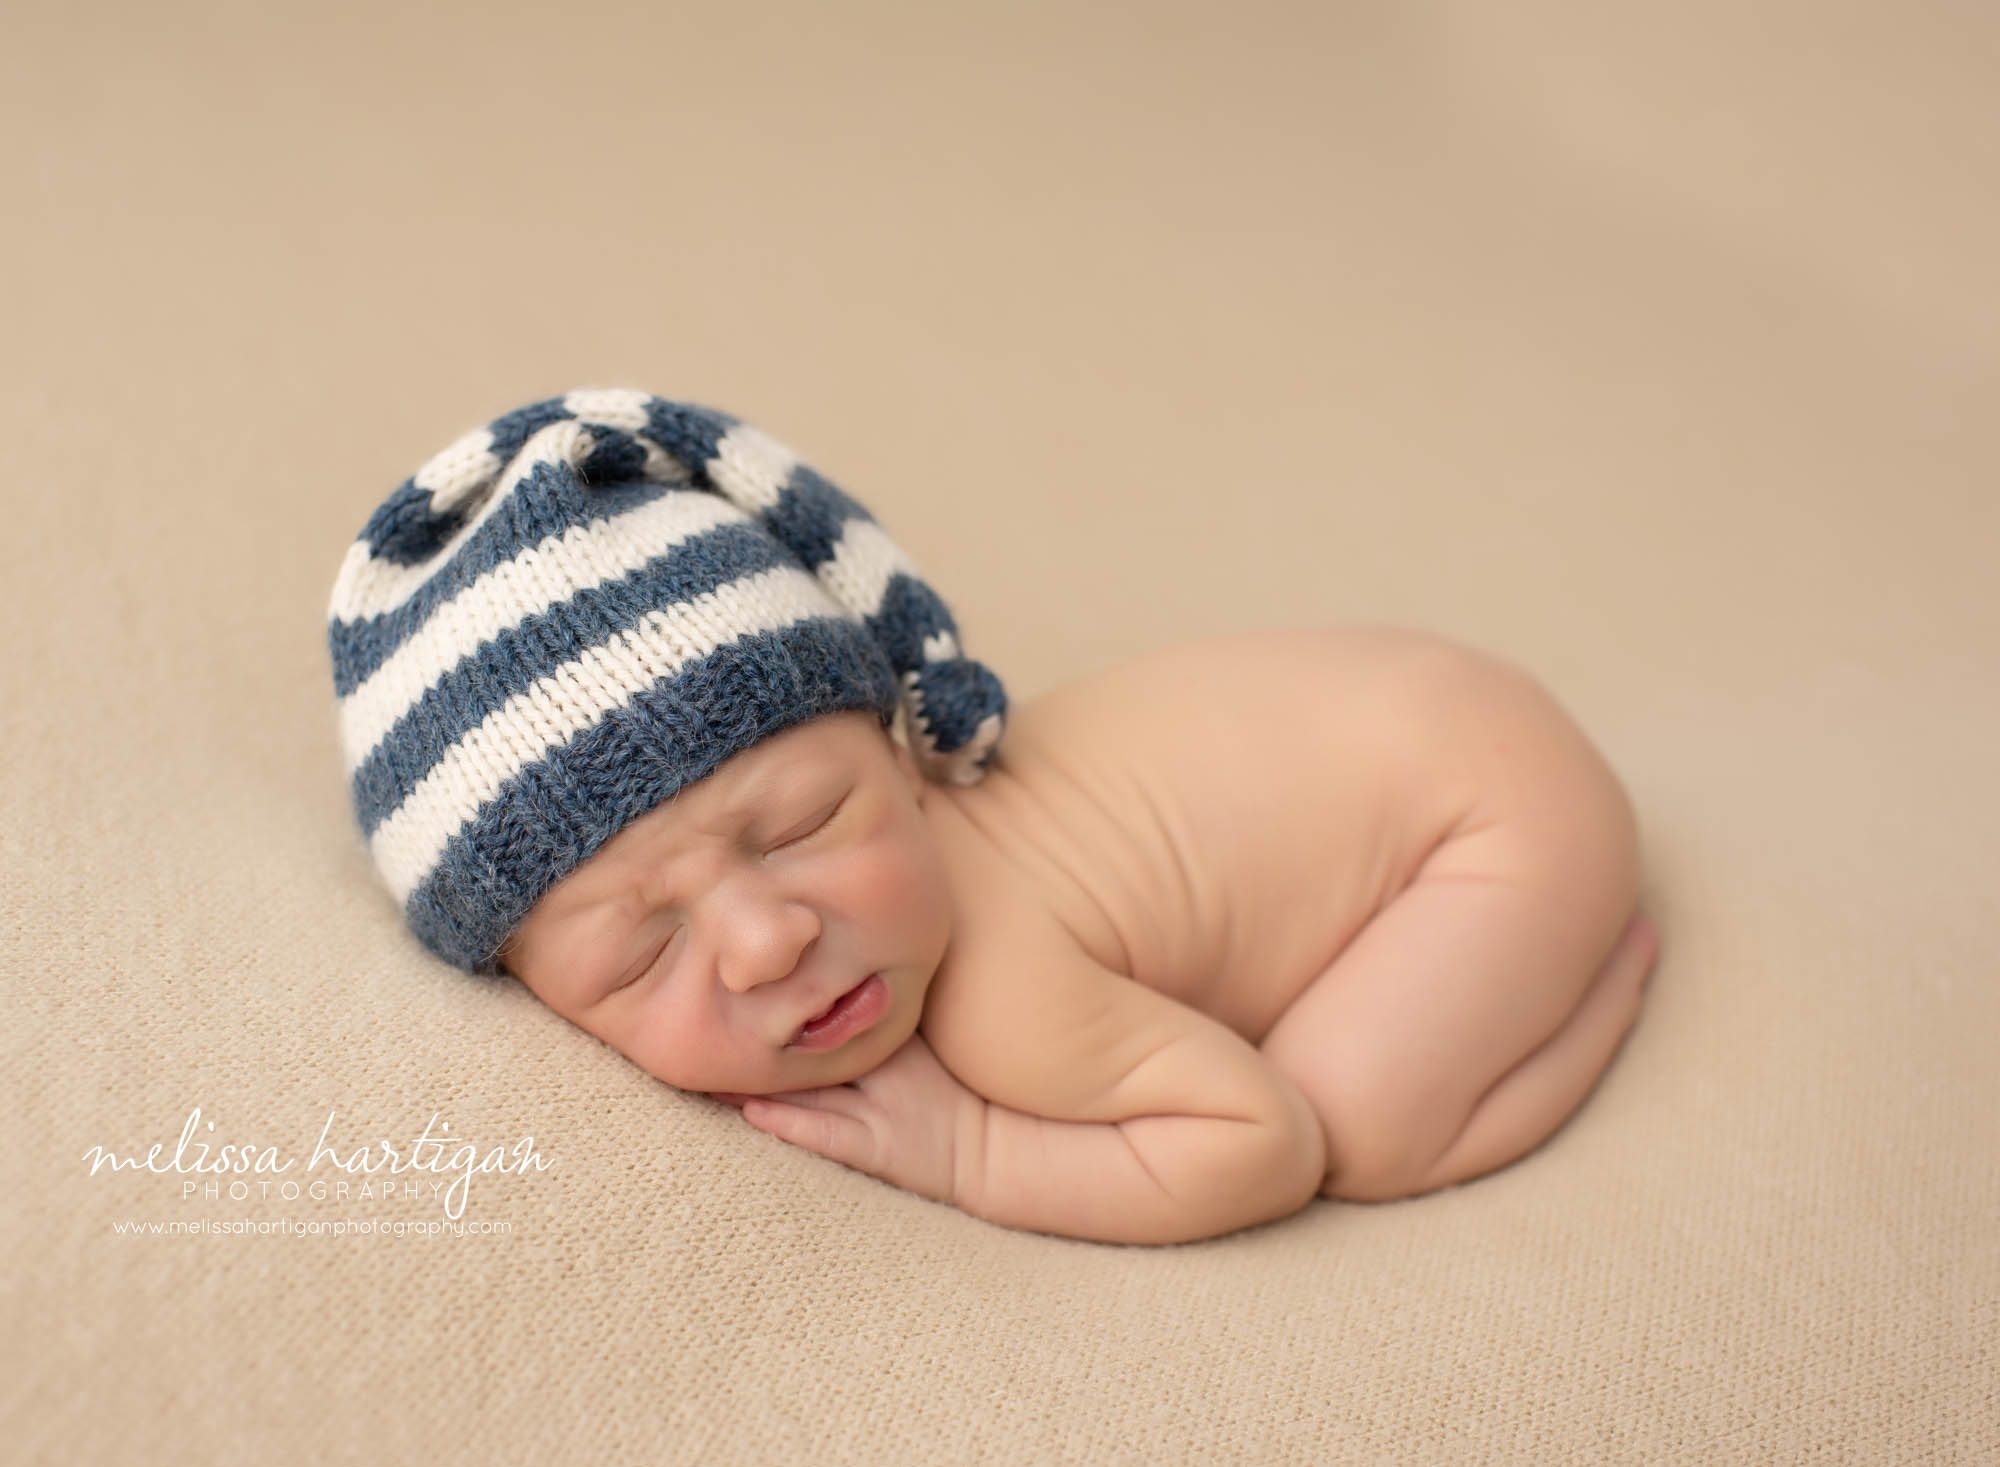 newborn on light colored backdrop with cream and blue striped knitted newborn hat